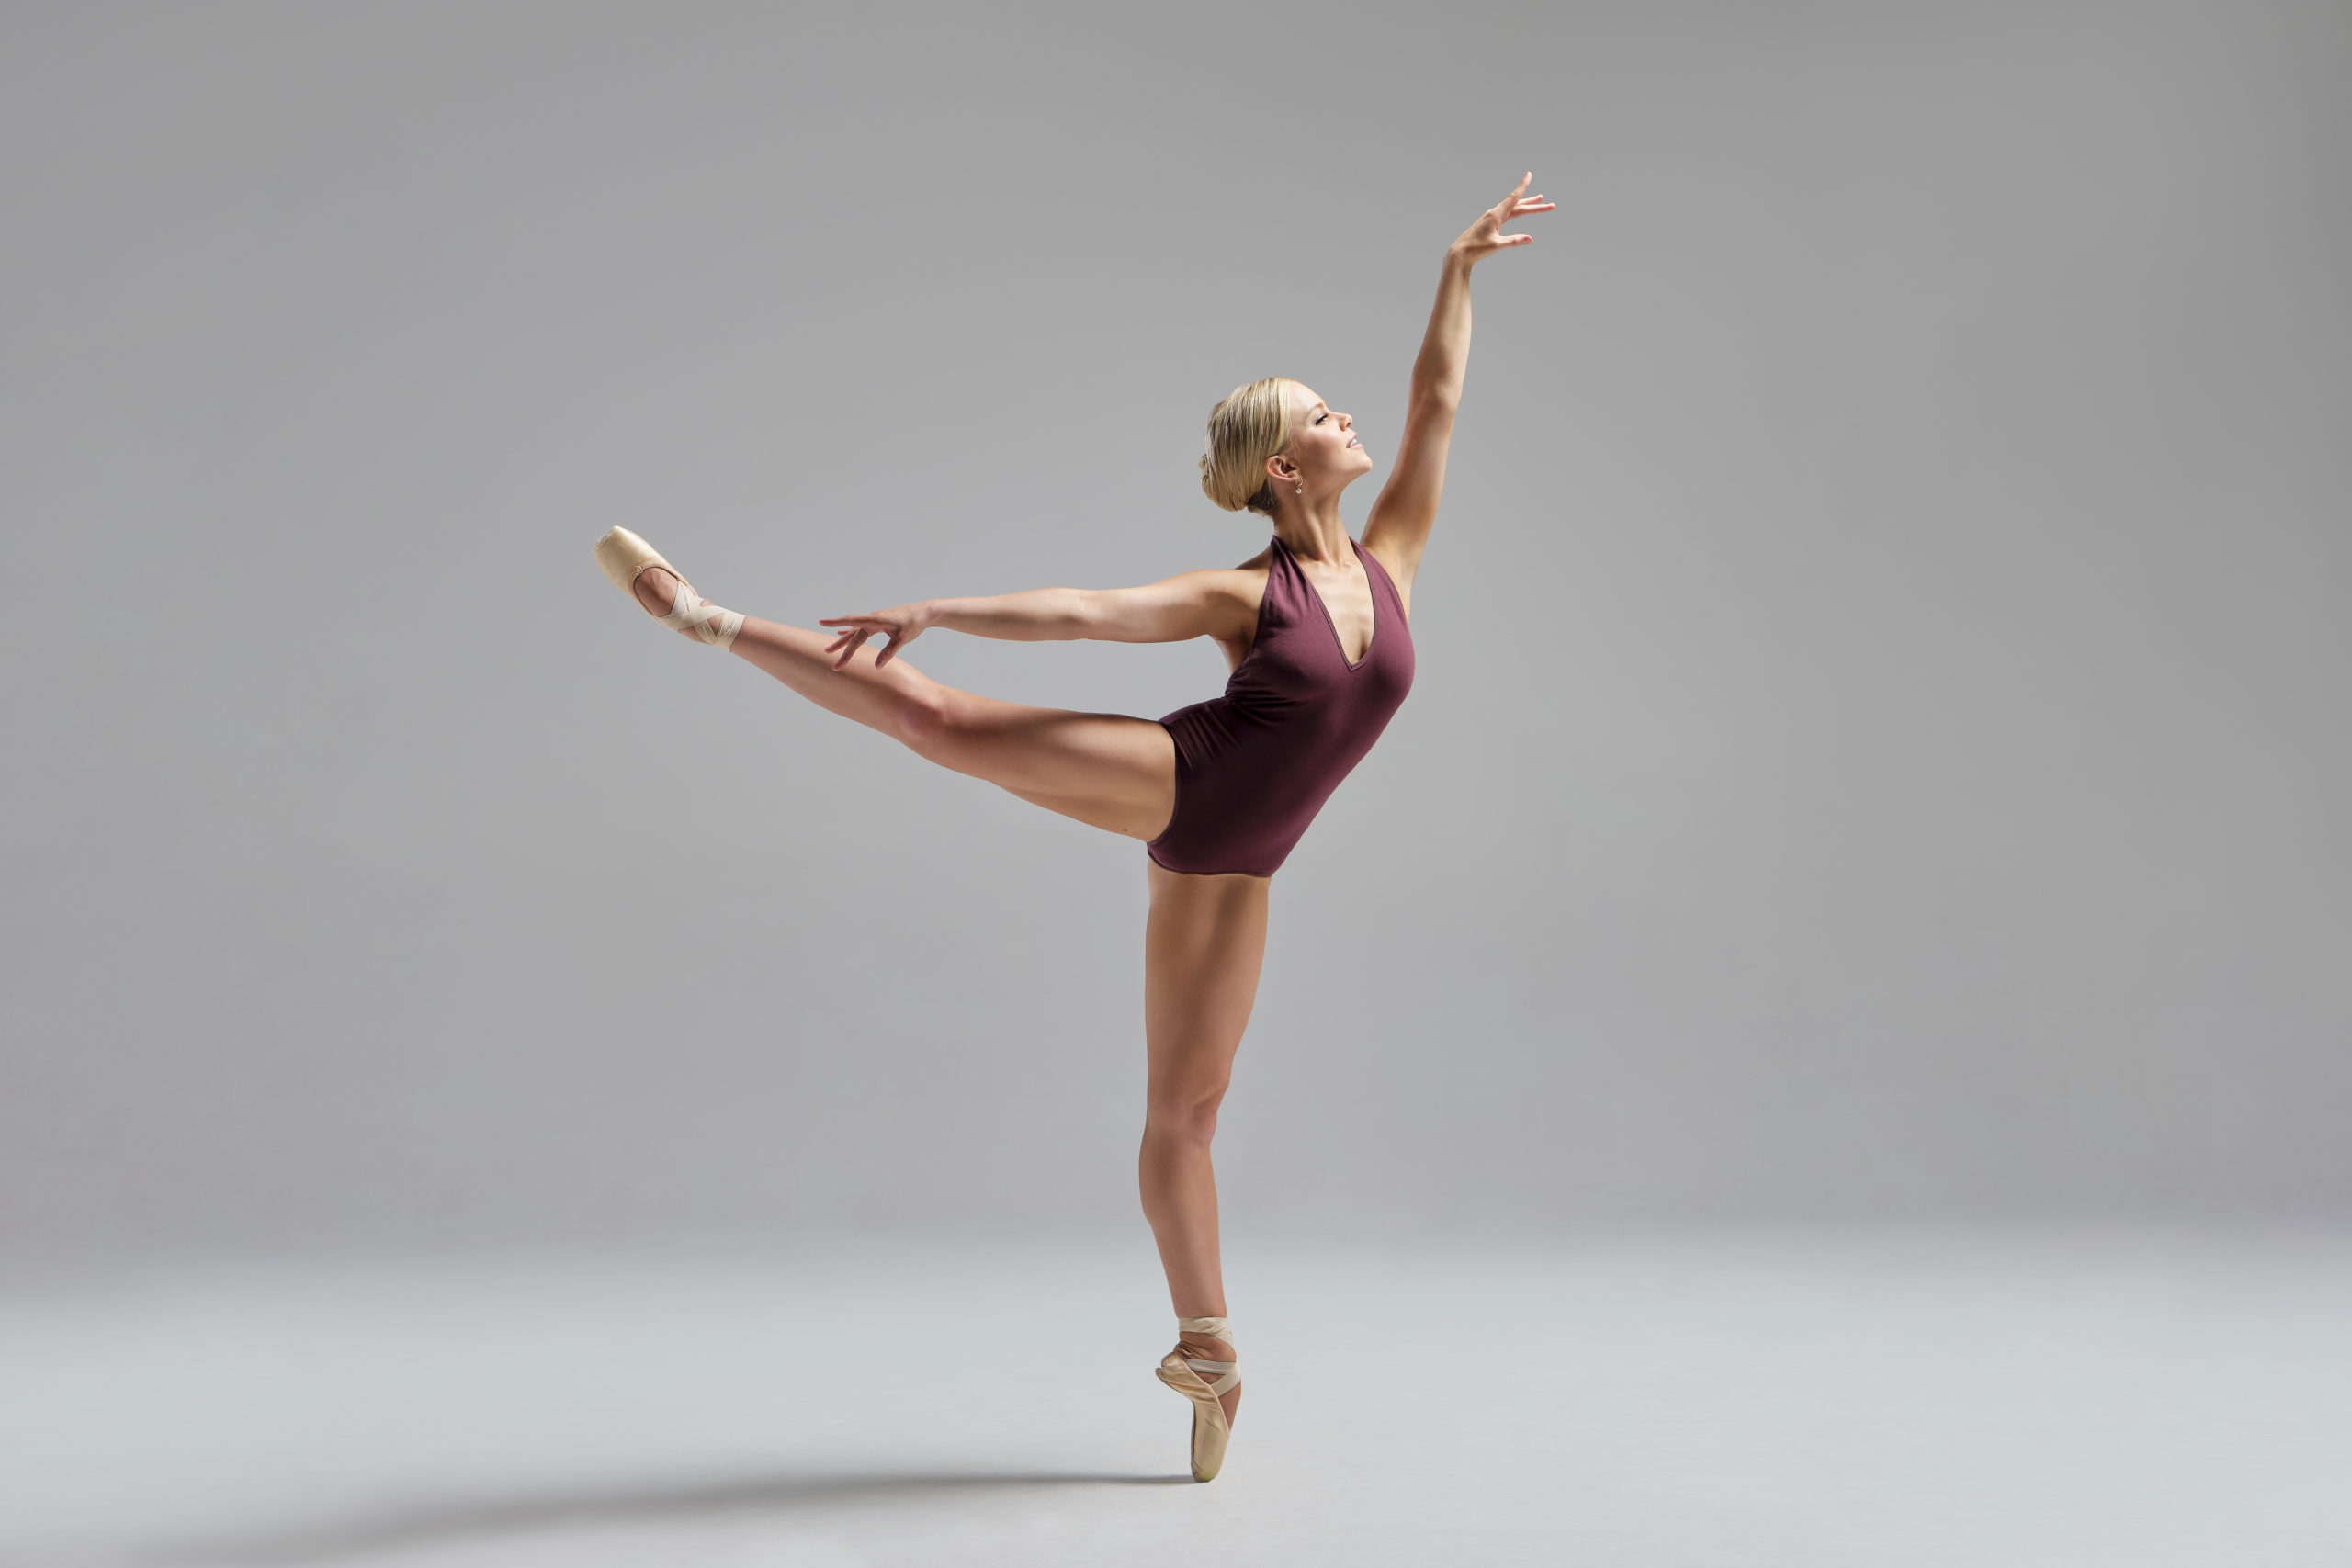 Haley Hilton is a fair-skinned woman with blonde hair pulled back into a bun and wearing a maroon sleeveless leotard. She faces left and poses in arabesque on pointe on her left leg, with her right leg and arm pointing backward and her left arm raised overhead.